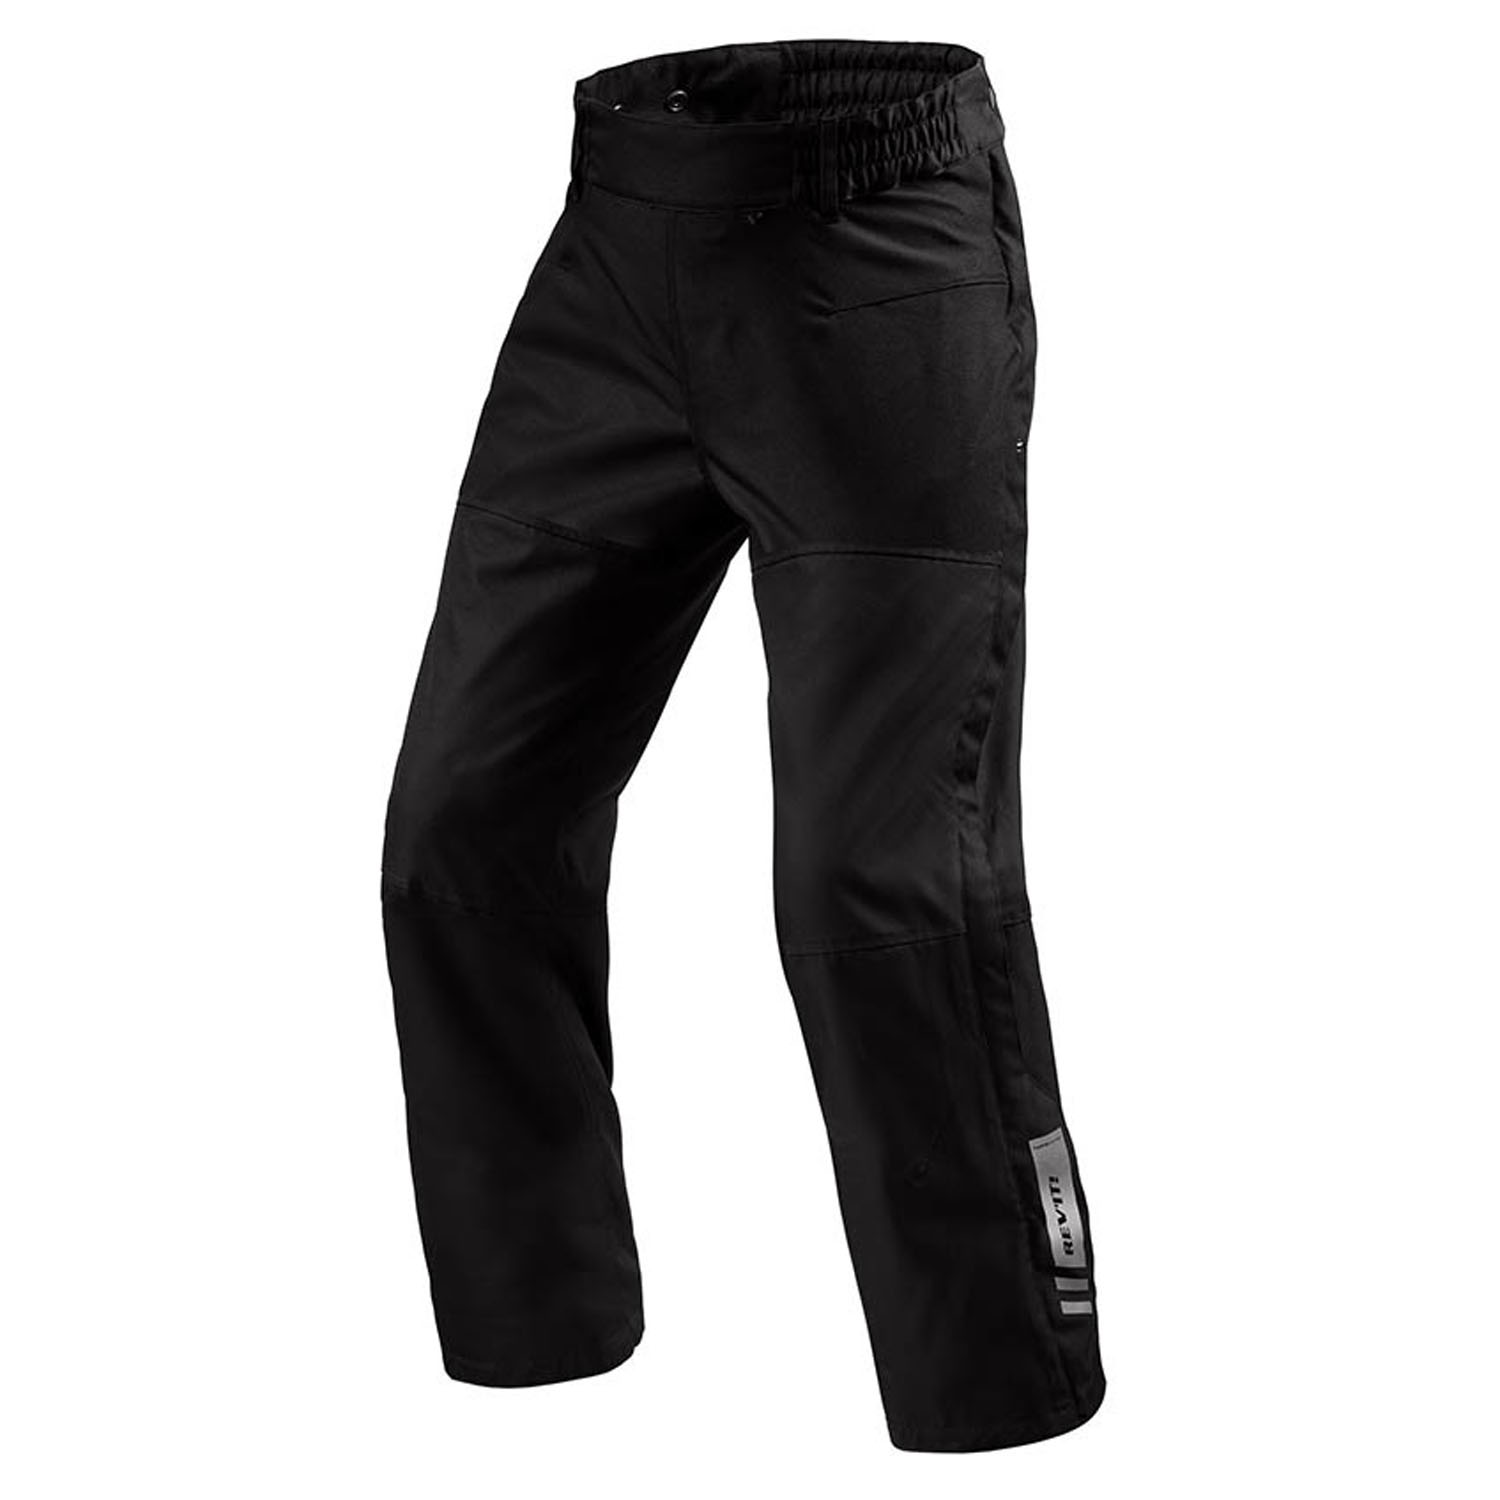 Image of REV'IT! Pants Axis 2 H2O Black Short Motorcycle Pants Taille 3XL